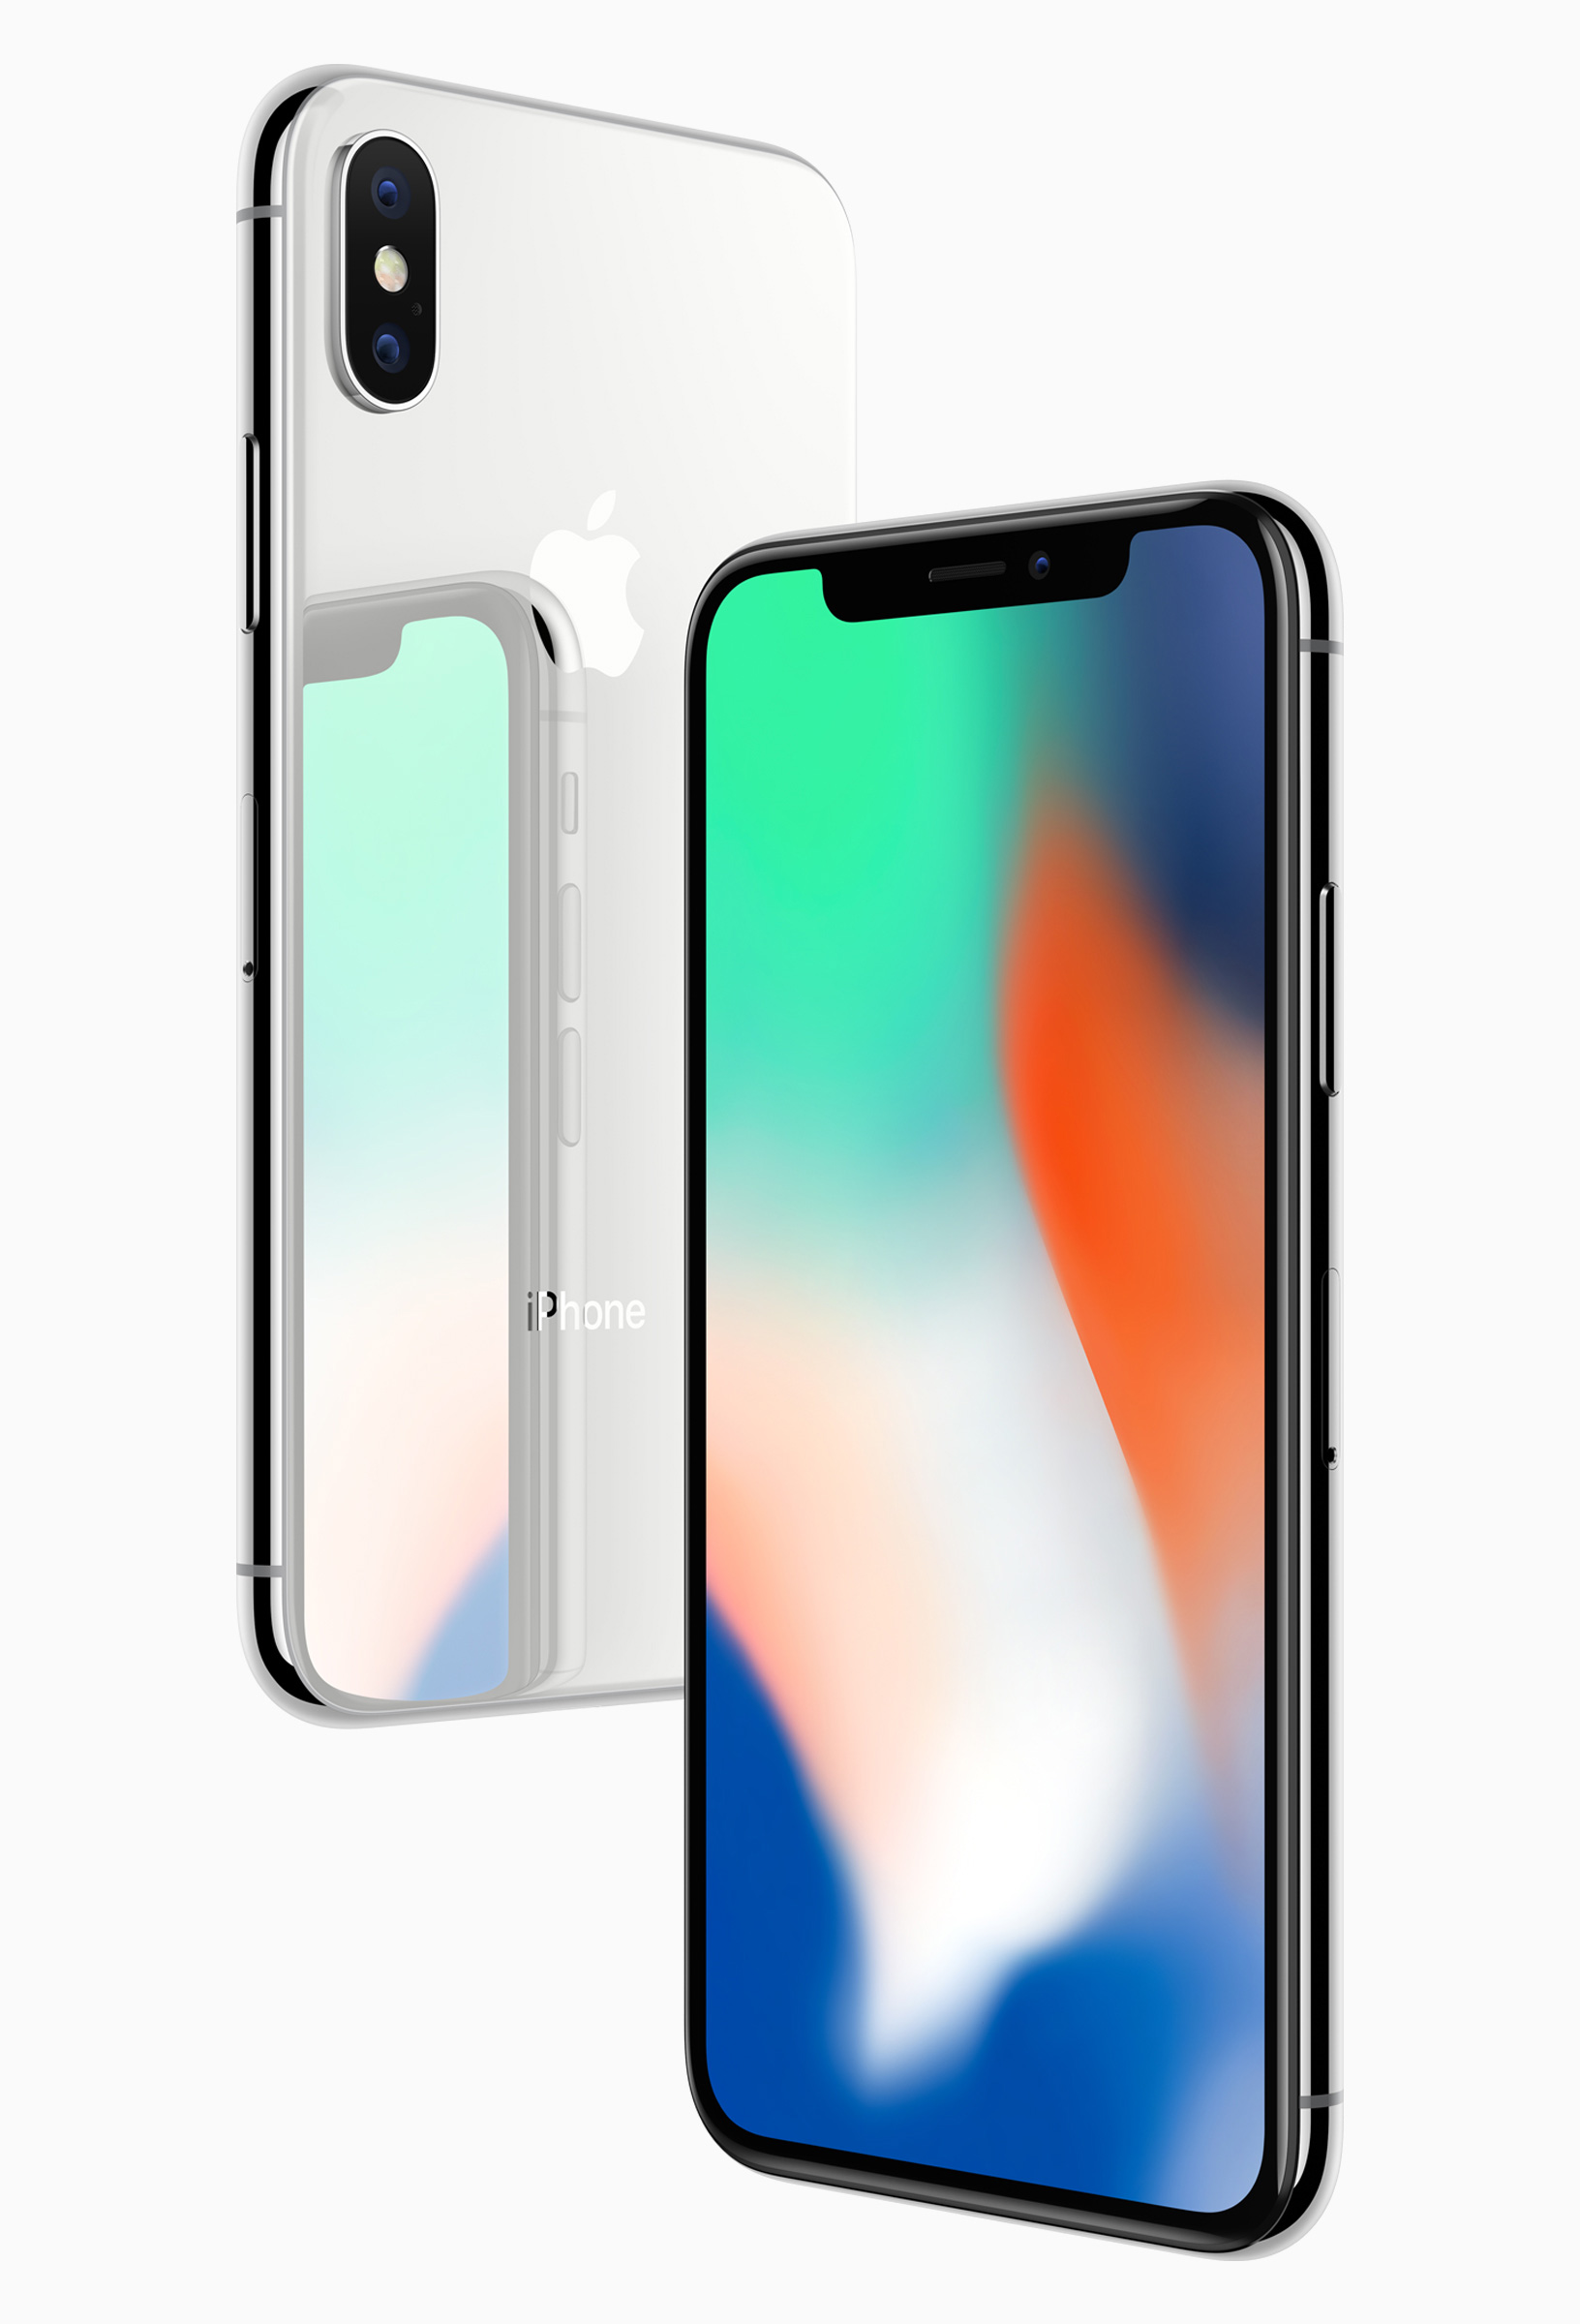 jammer kit autozone parts - iPhone X Features Face ID, Edge-to-Edge Screen